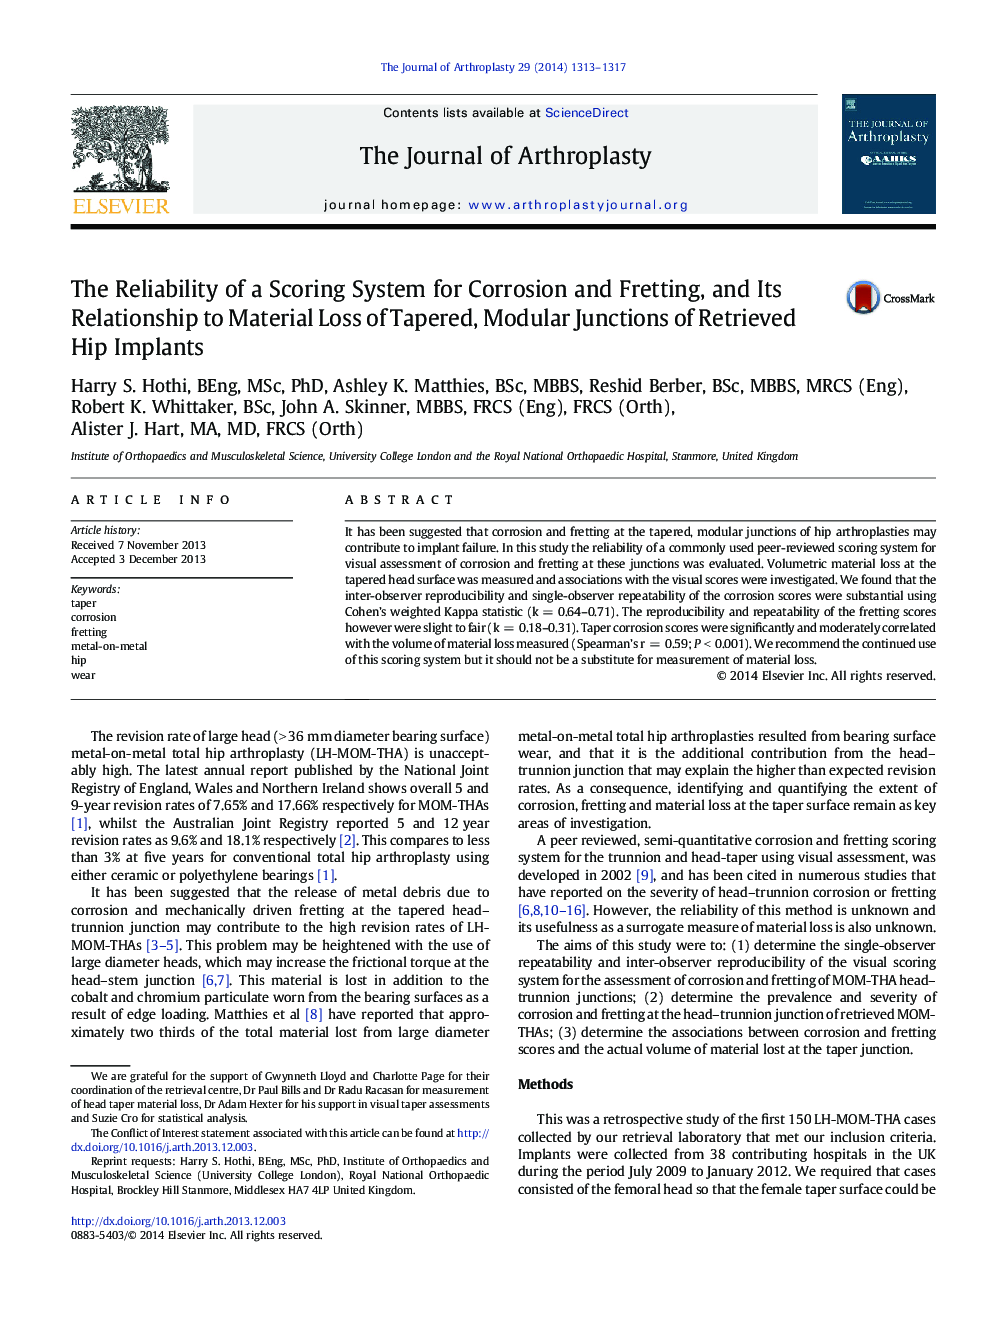 The Reliability of a Scoring System for Corrosion and Fretting, and Its Relationship to Material Loss of Tapered, Modular Junctions of Retrieved Hip Implants